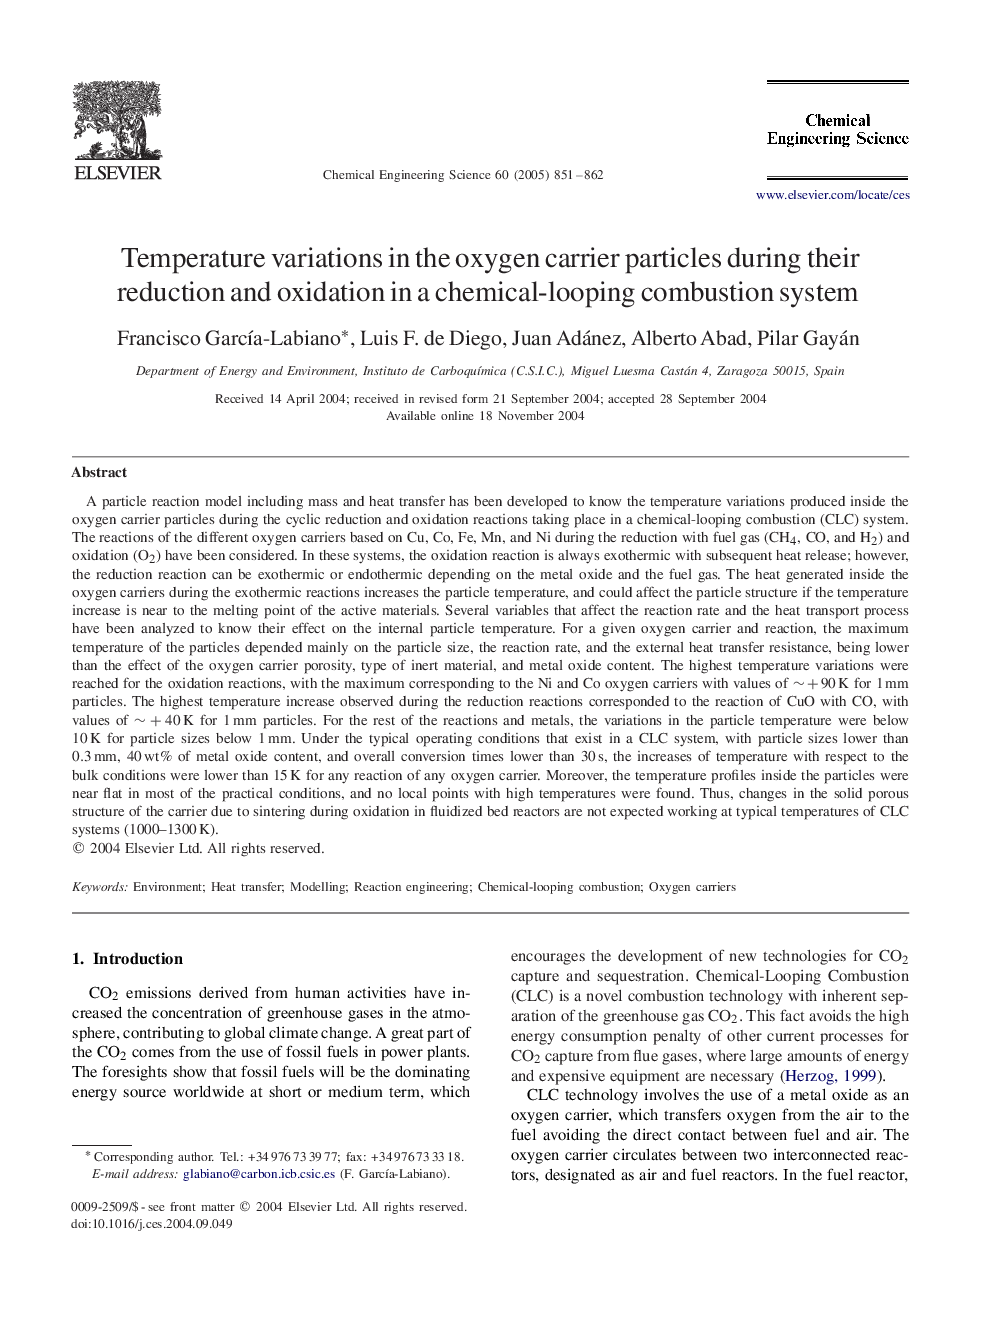 Temperature variations in the oxygen carrier particles during their reduction and oxidation in a chemical-looping combustion system